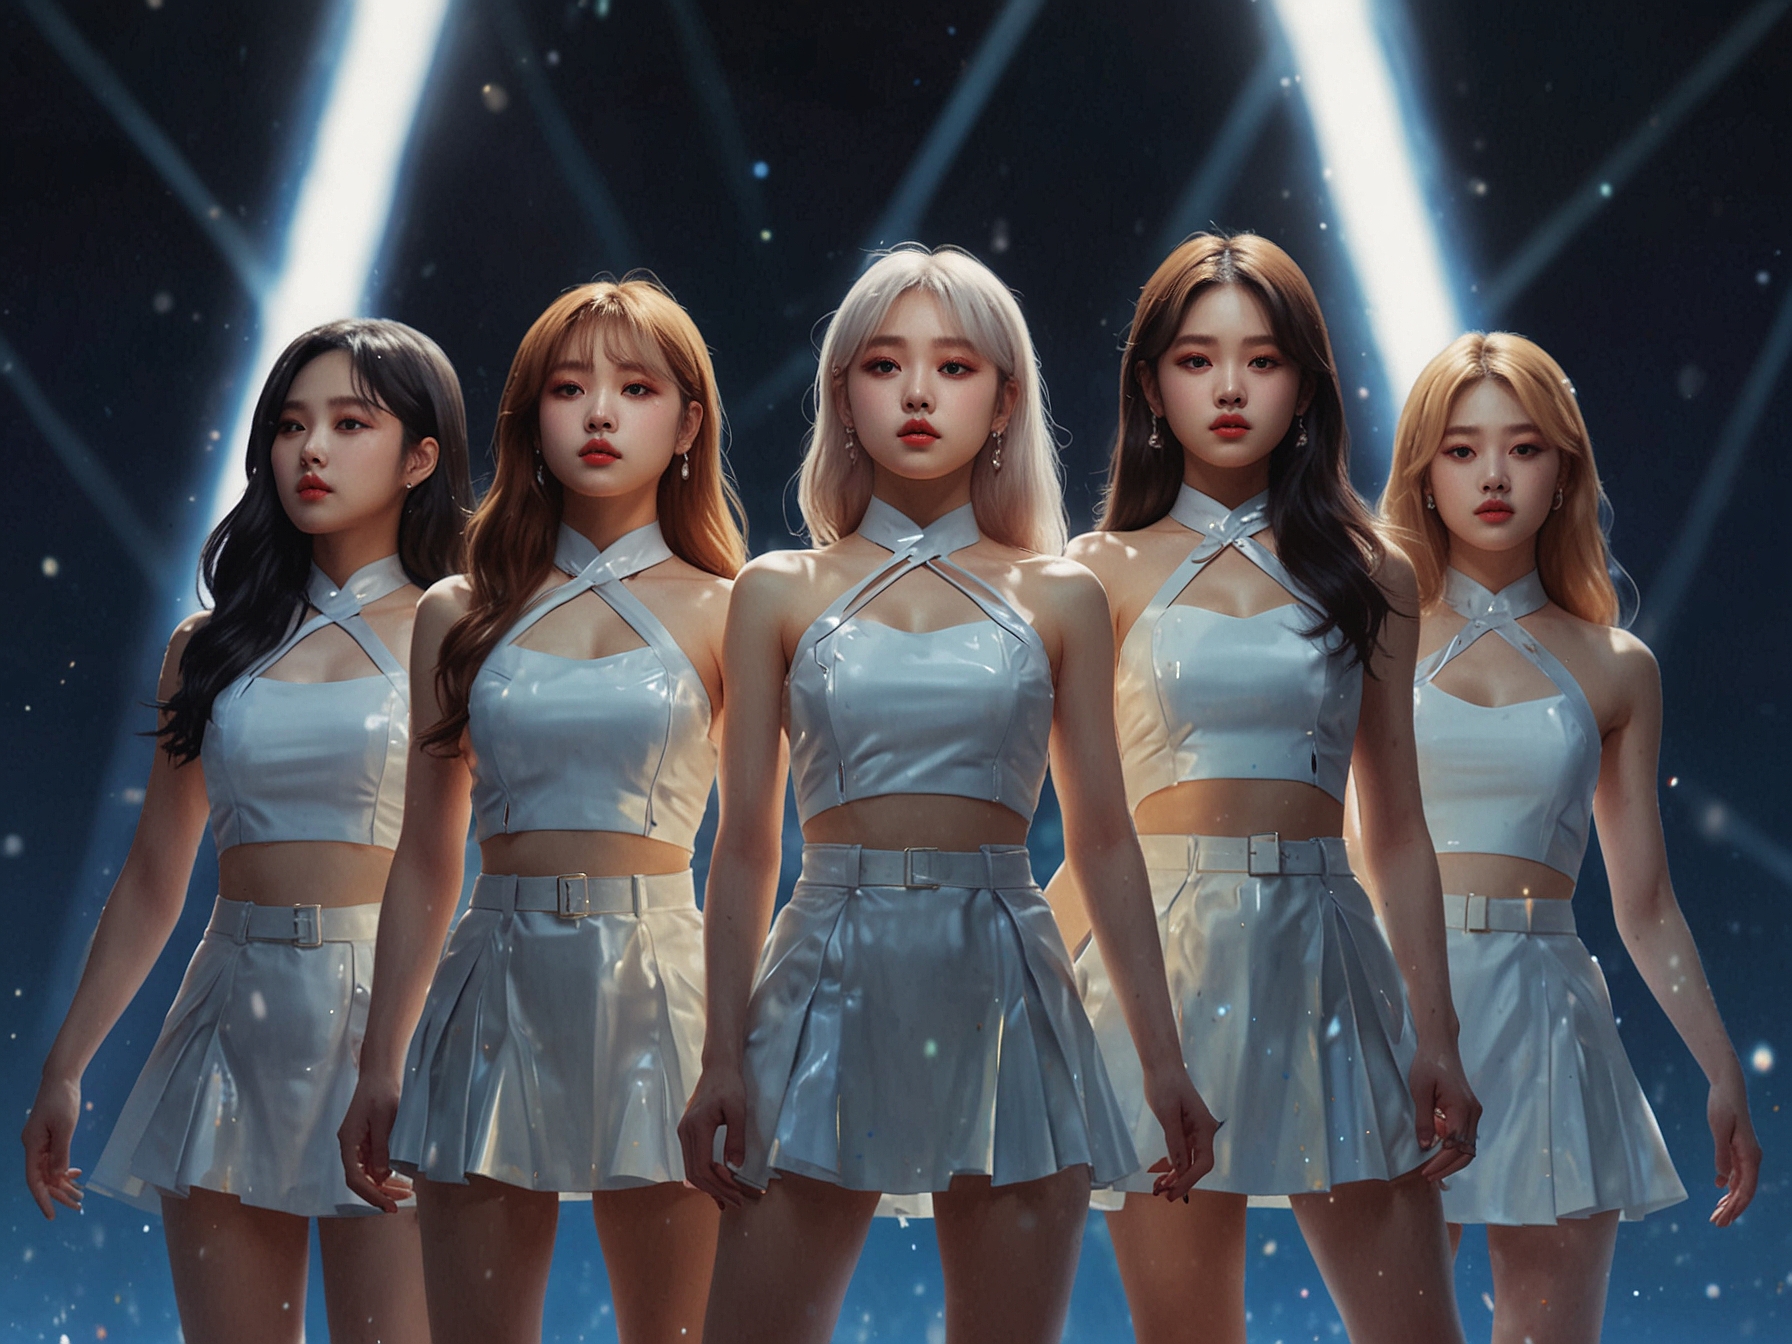 A group photo of PIXY performing energetically, reflecting their ethereal concept and powerful performances, which have garnered a dedicated fanbase. Dajeong is prominently featured, symbolizing her pivotal role.